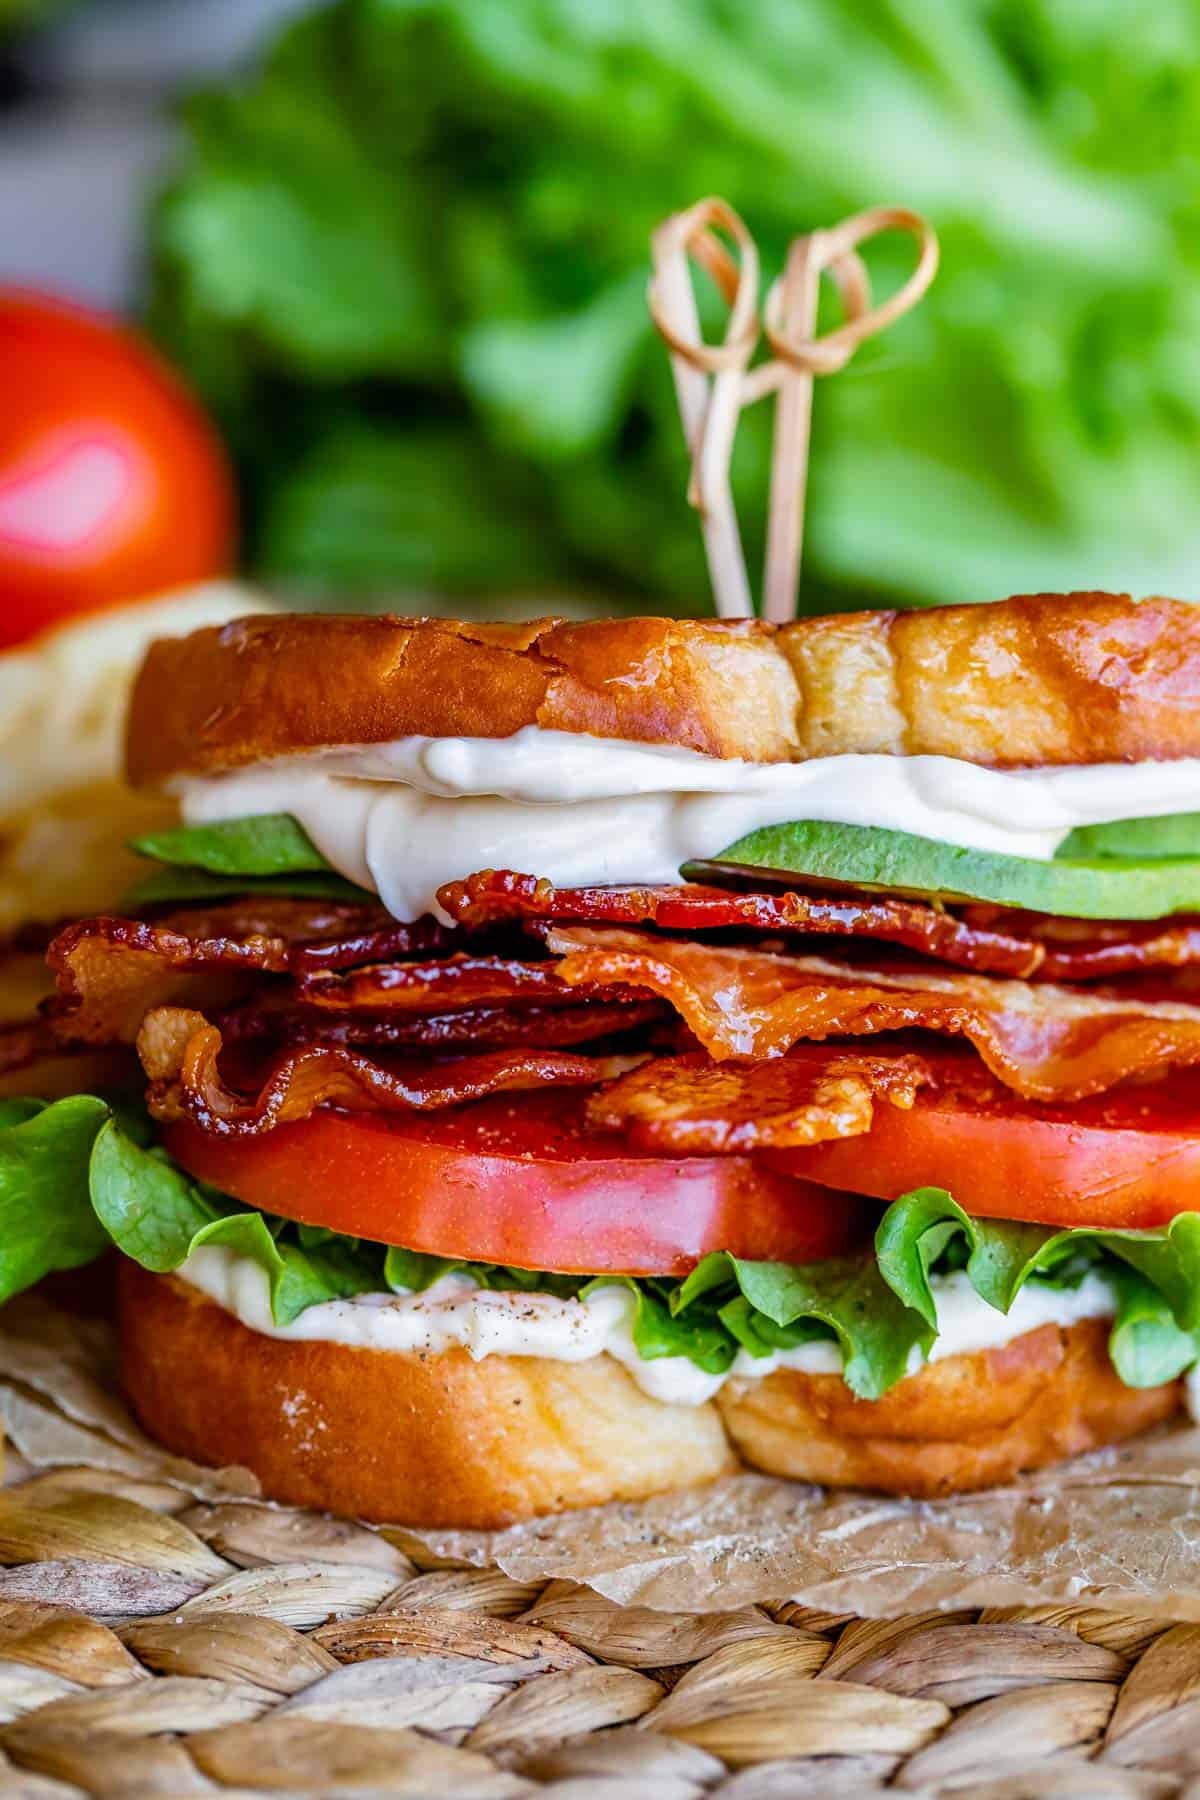 How To Make The Best BLT Sandwich! - The Food Charlatan